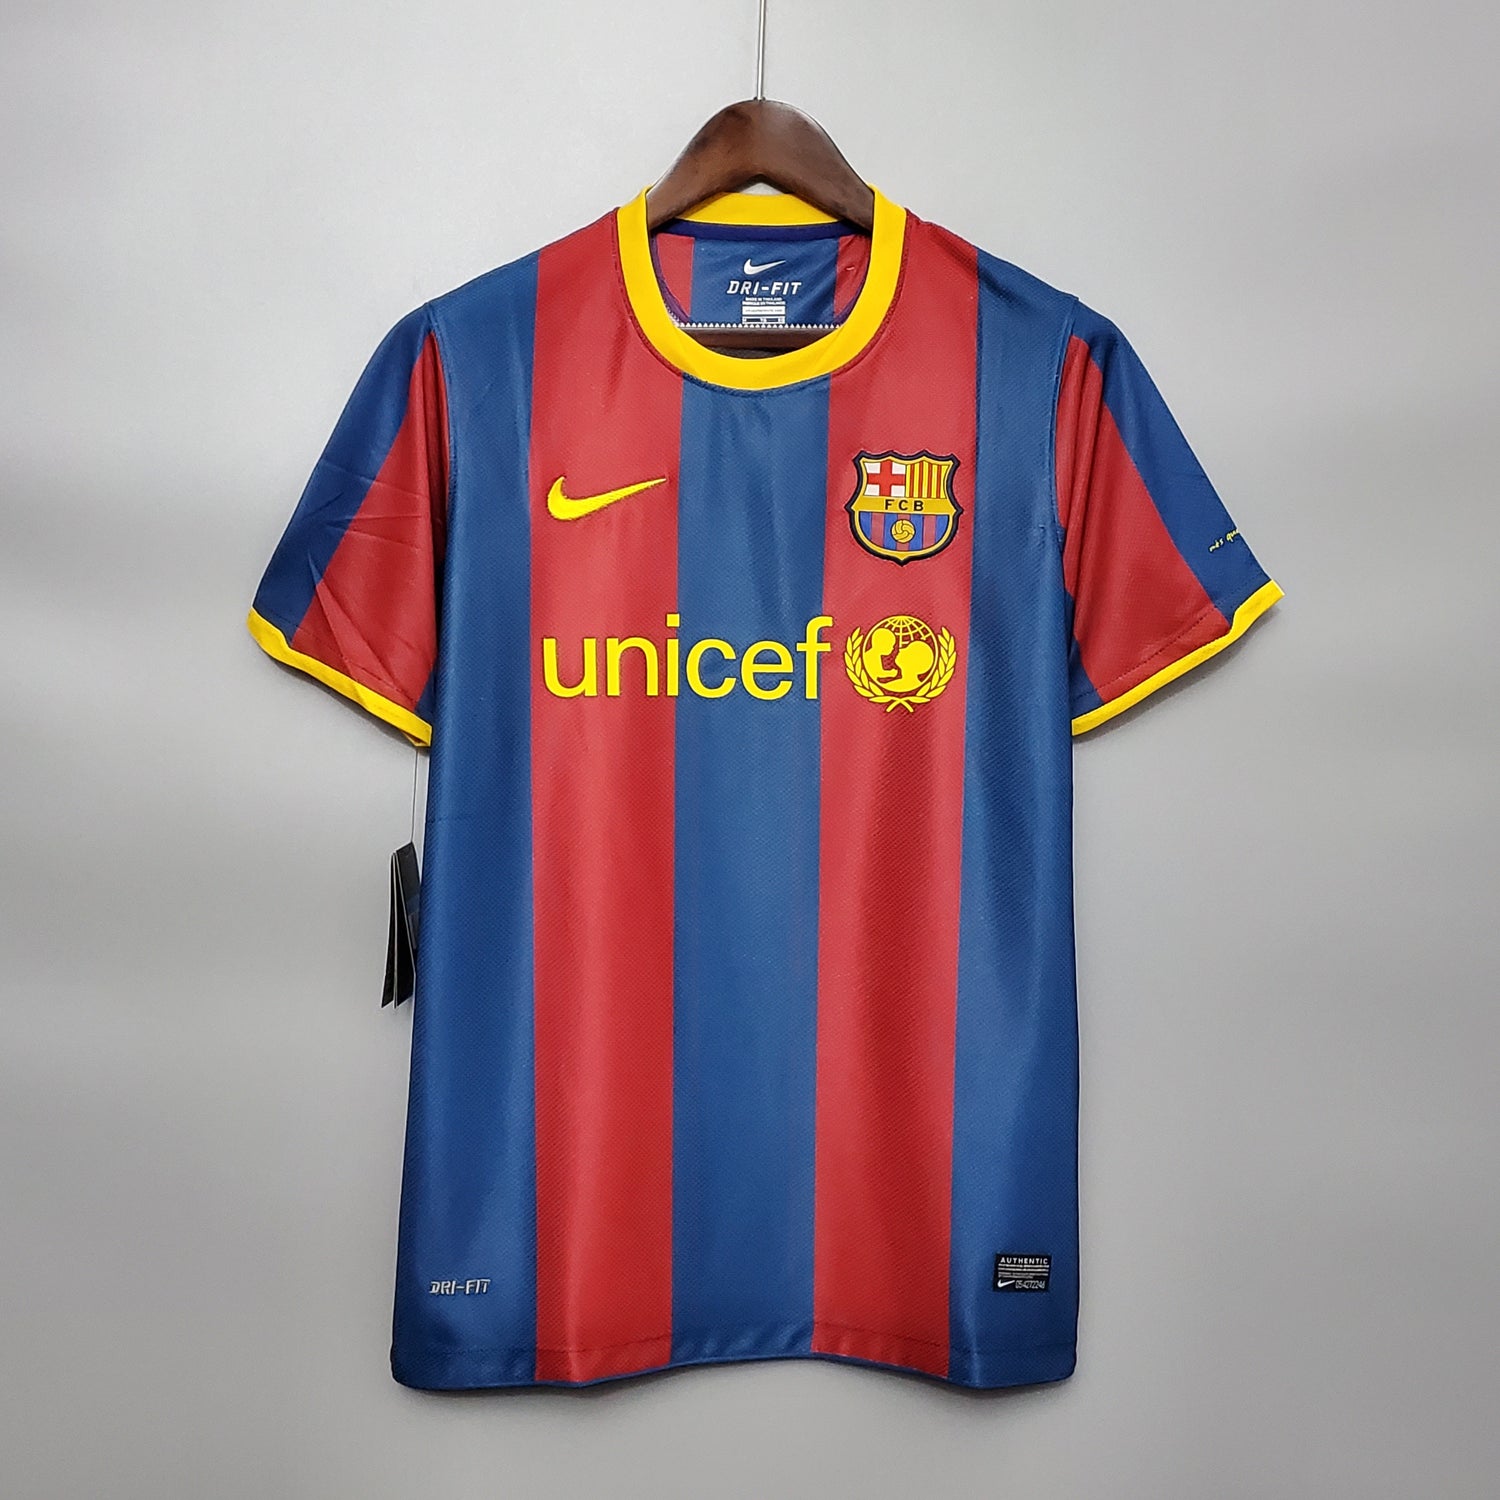 MESSI 10 BARCELONA 2010/11 HOME JERSEY – MYTHS